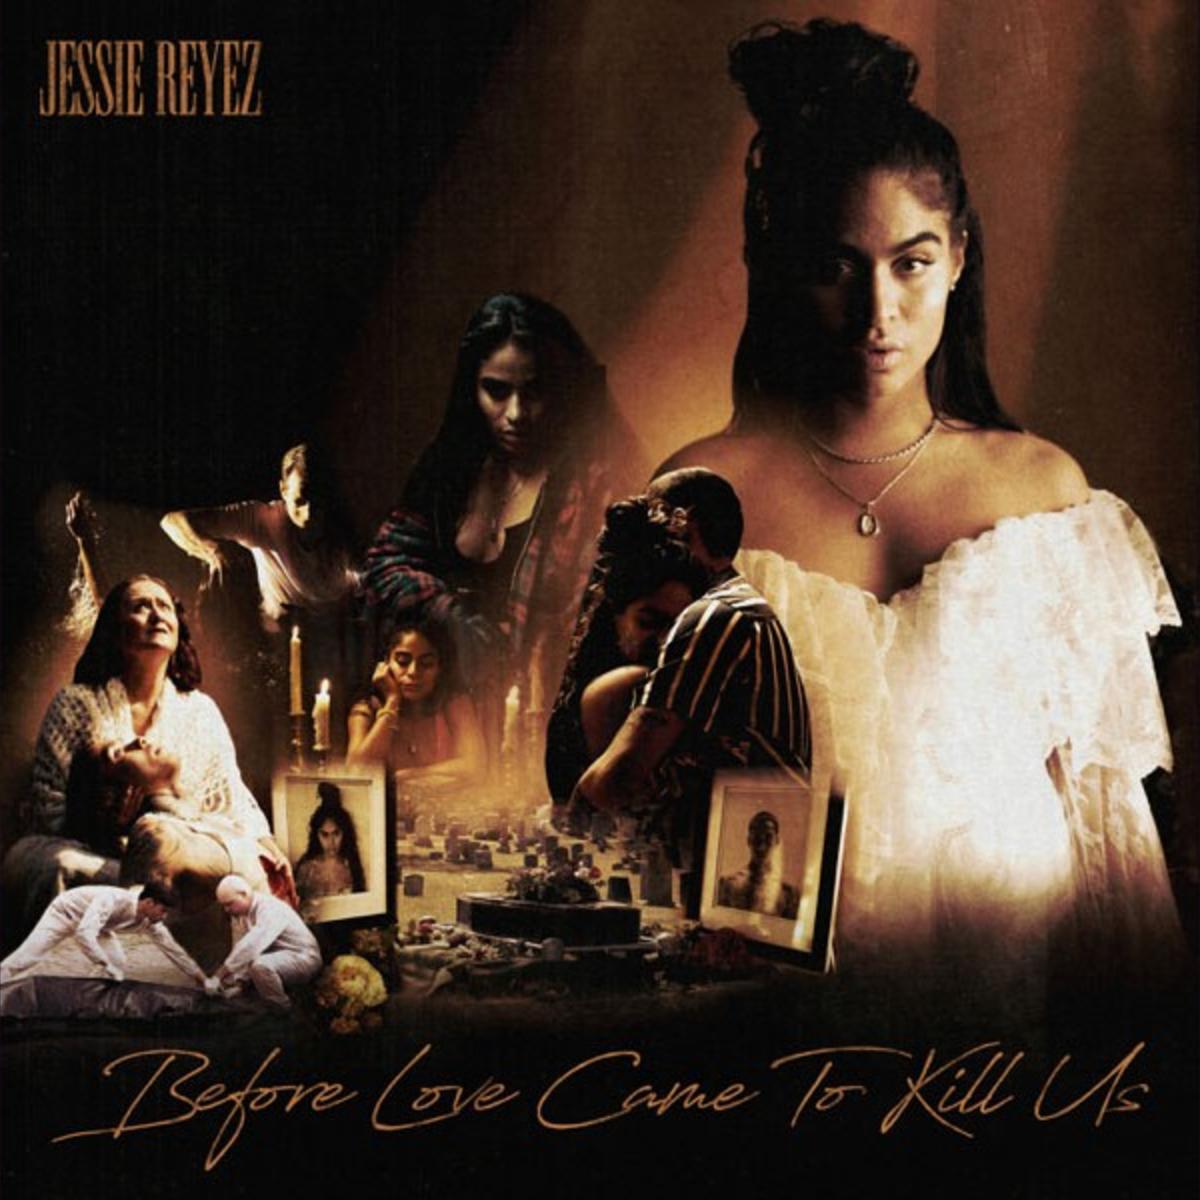 Listen To “BEFORE LOVE CAME TO KILL US (Deluxe Edition)” By Jessie Reyez